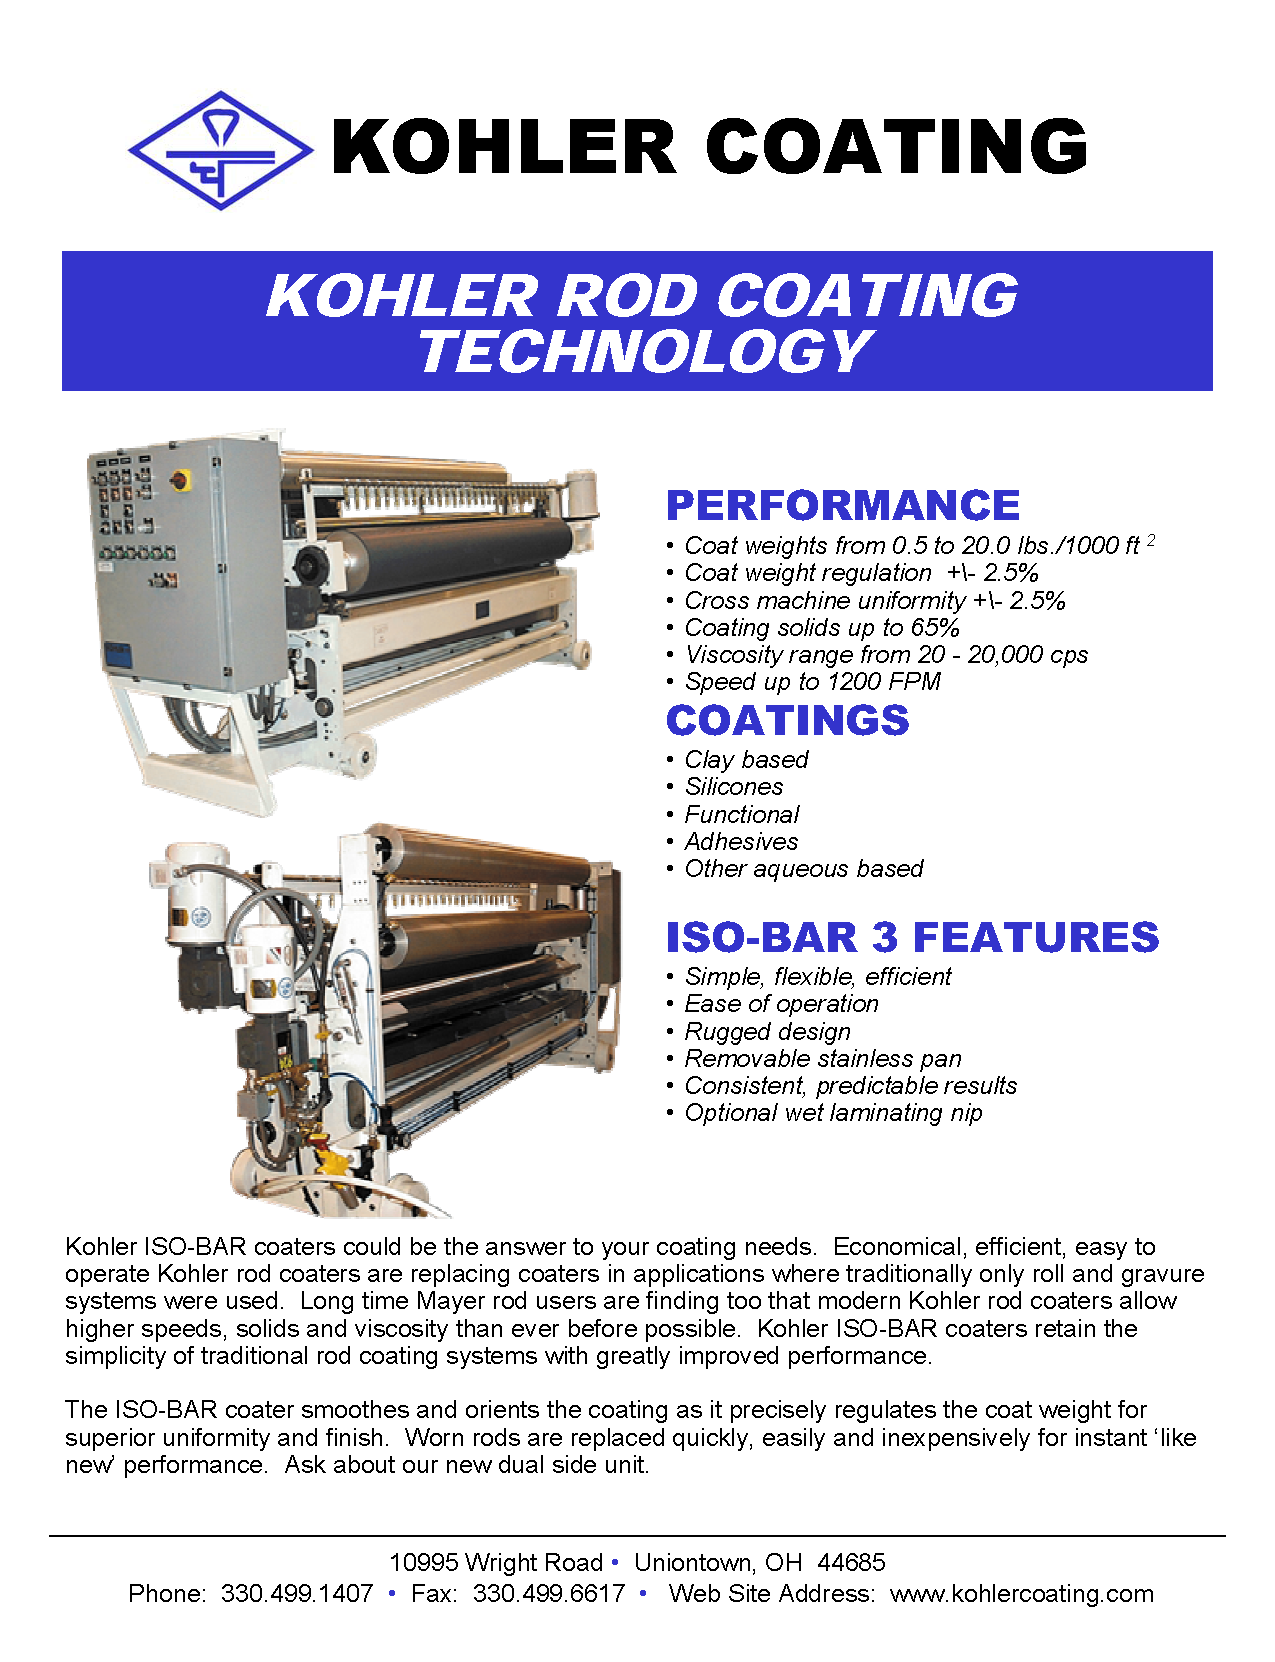 Learn more by viewing the Kohler Coating Rod Coating Technology Brochure. 